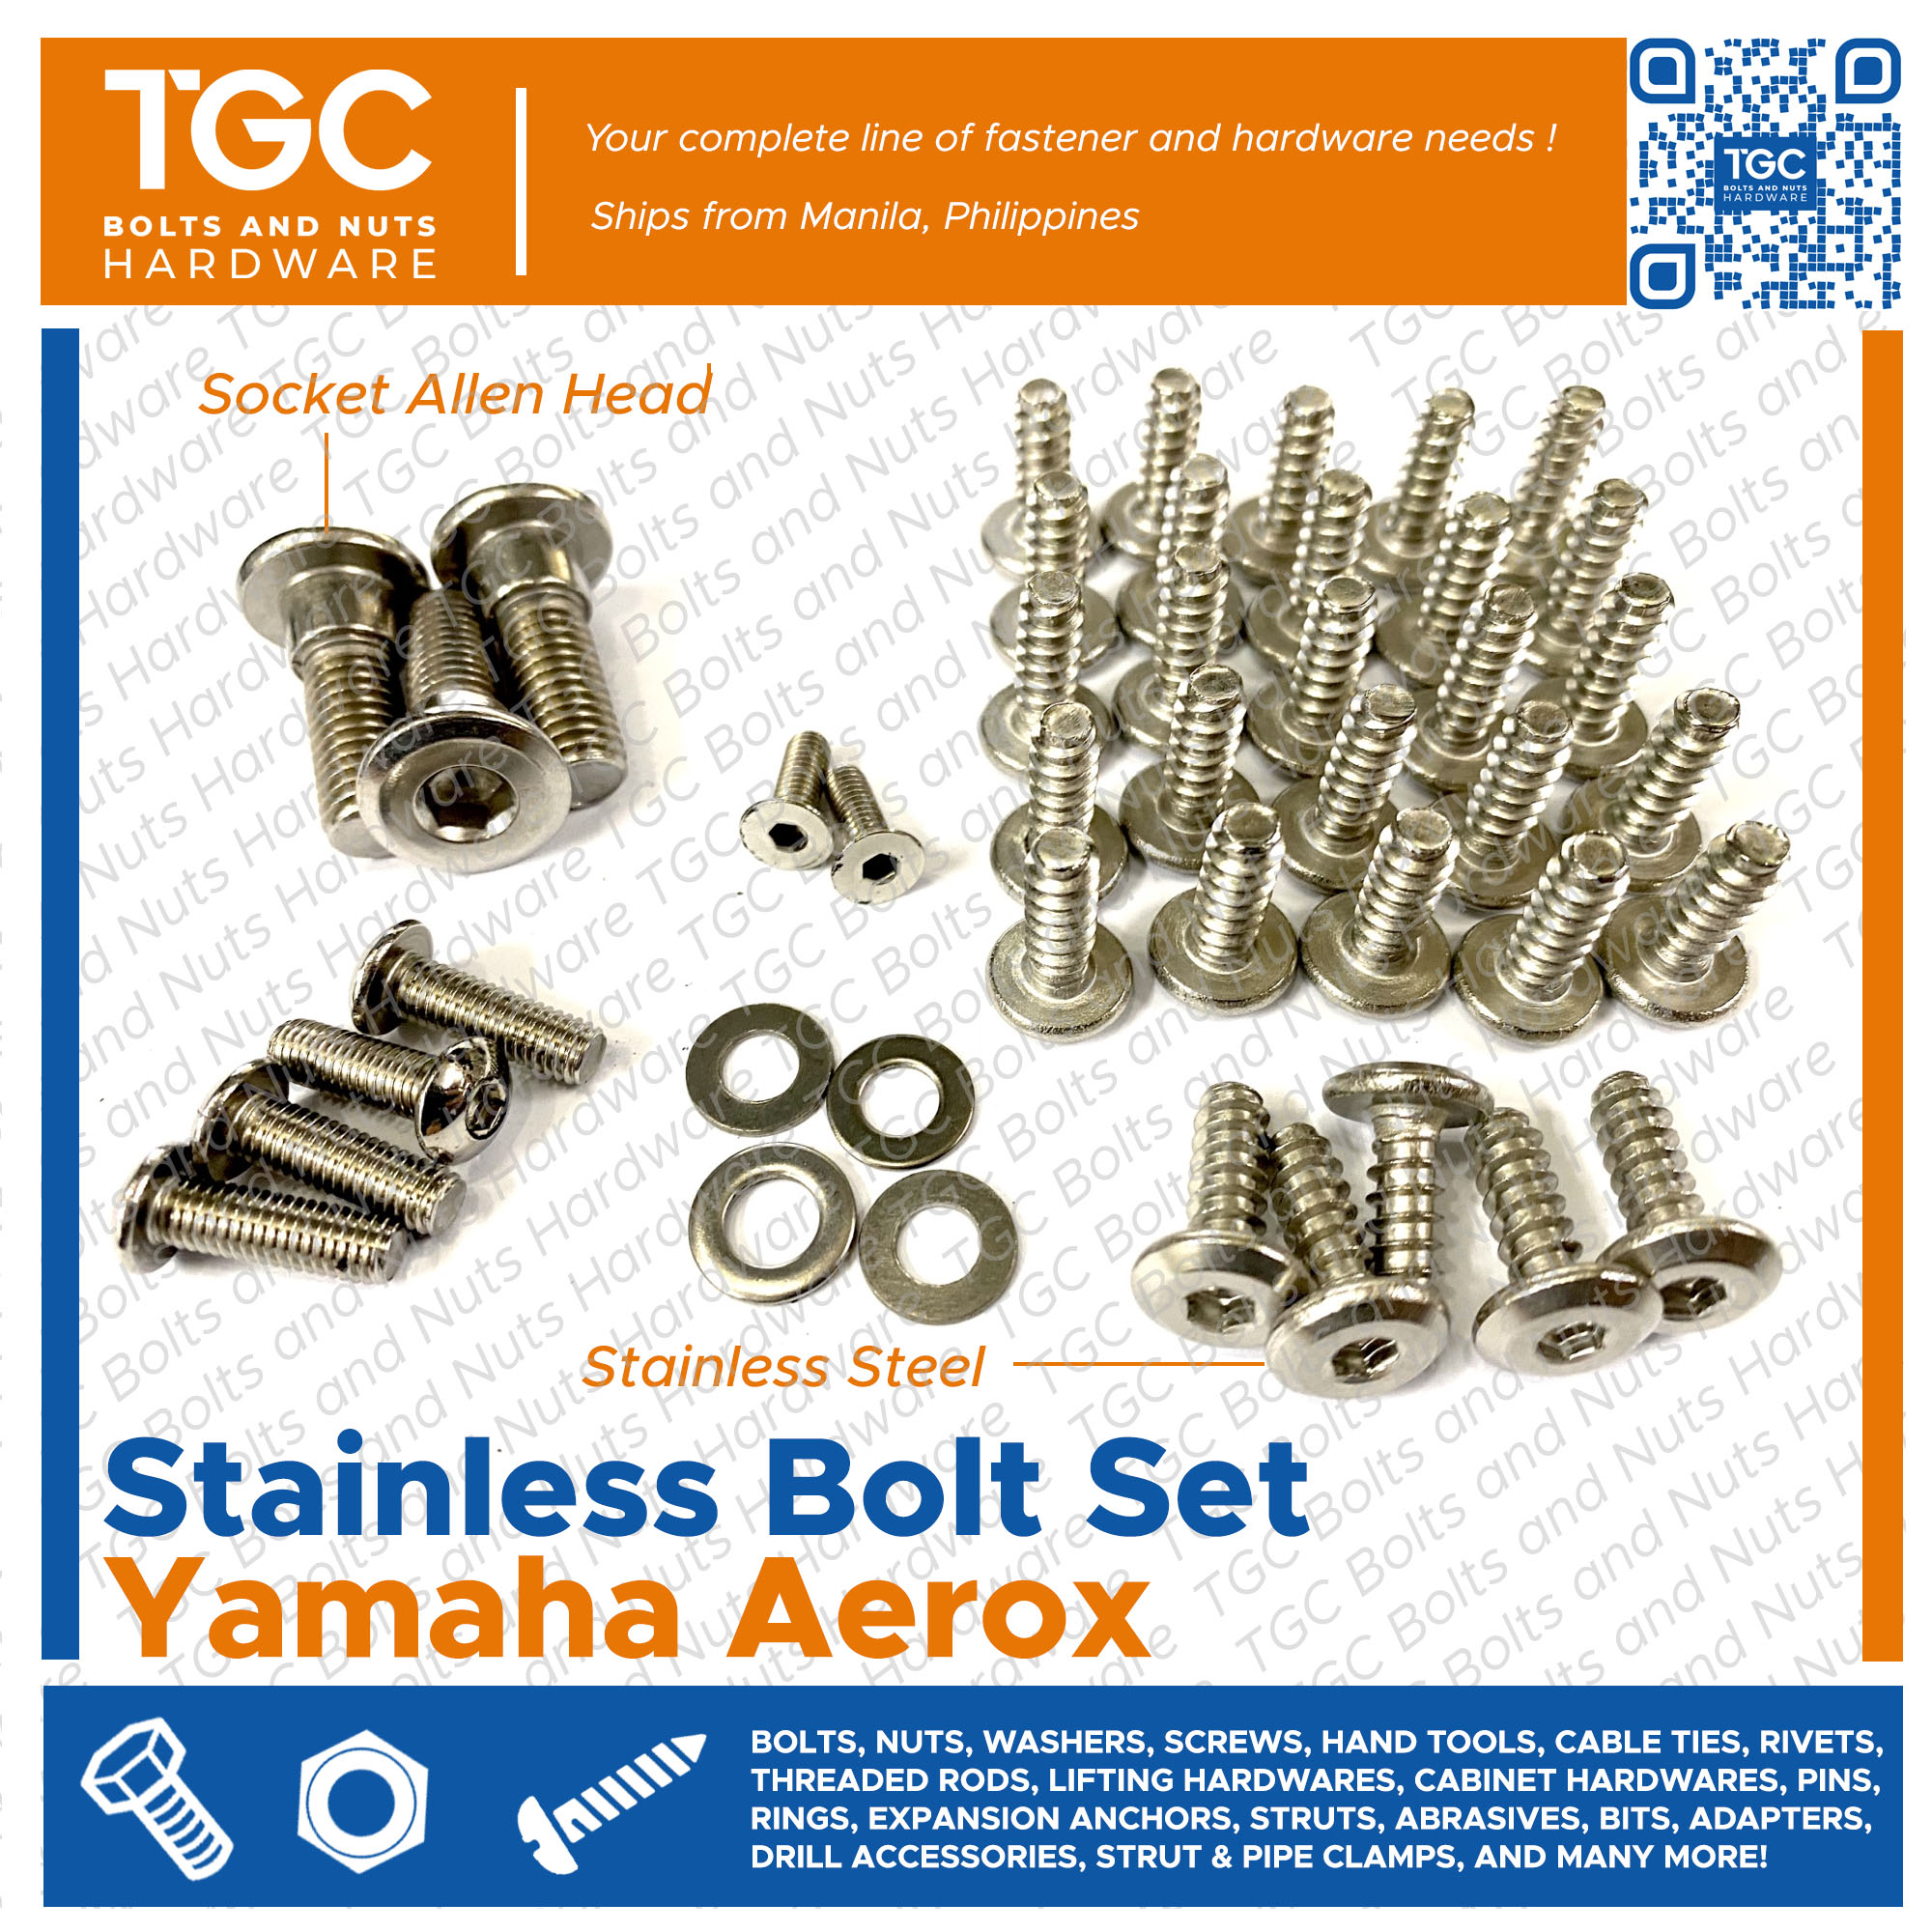 Fastener Products, Nuts & Bolts, Screws, Washers, Rivets